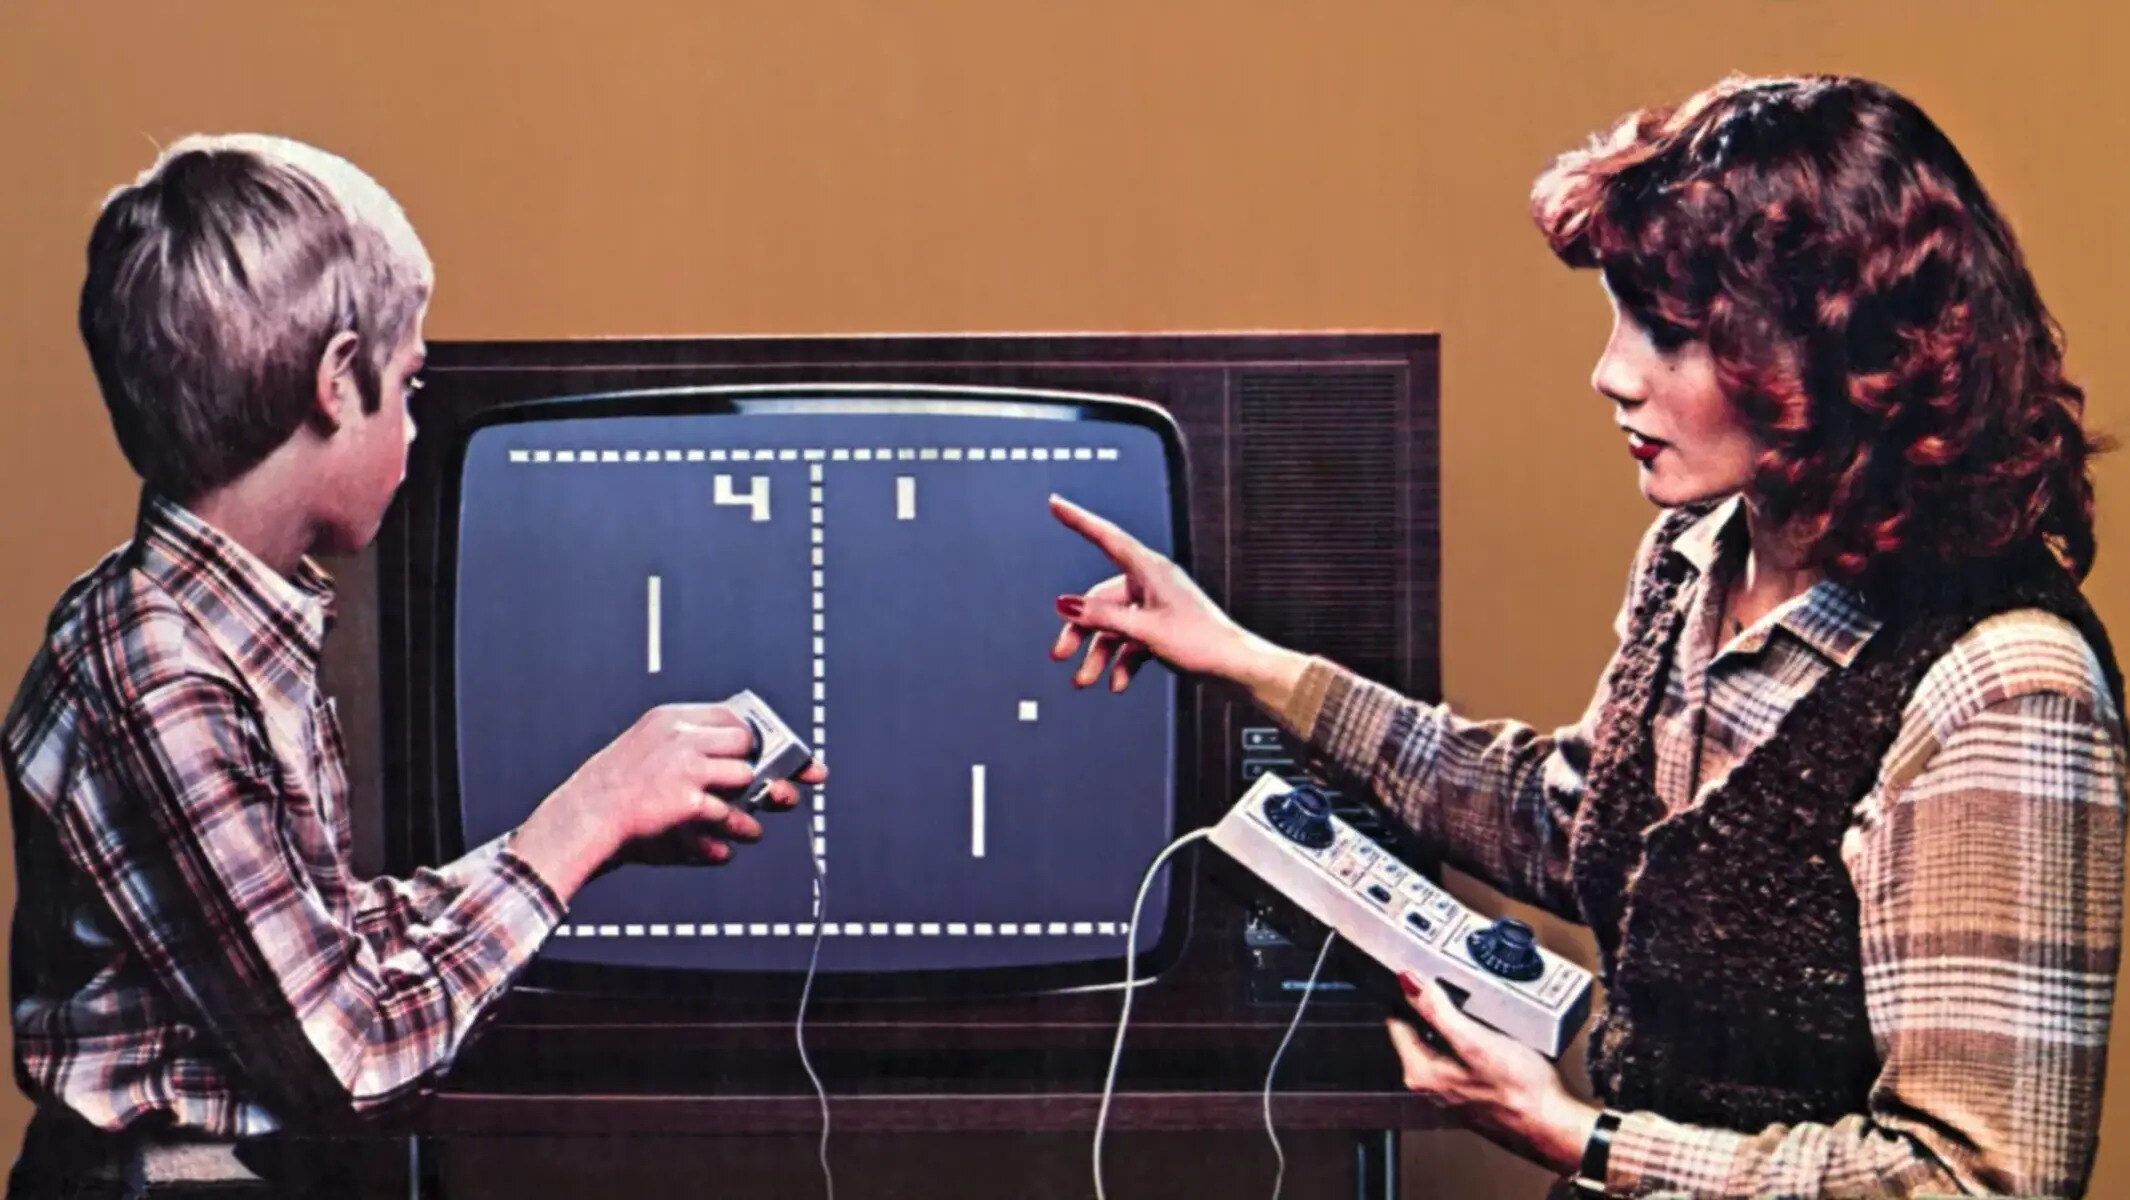 Pong: The First Video Game Megahit